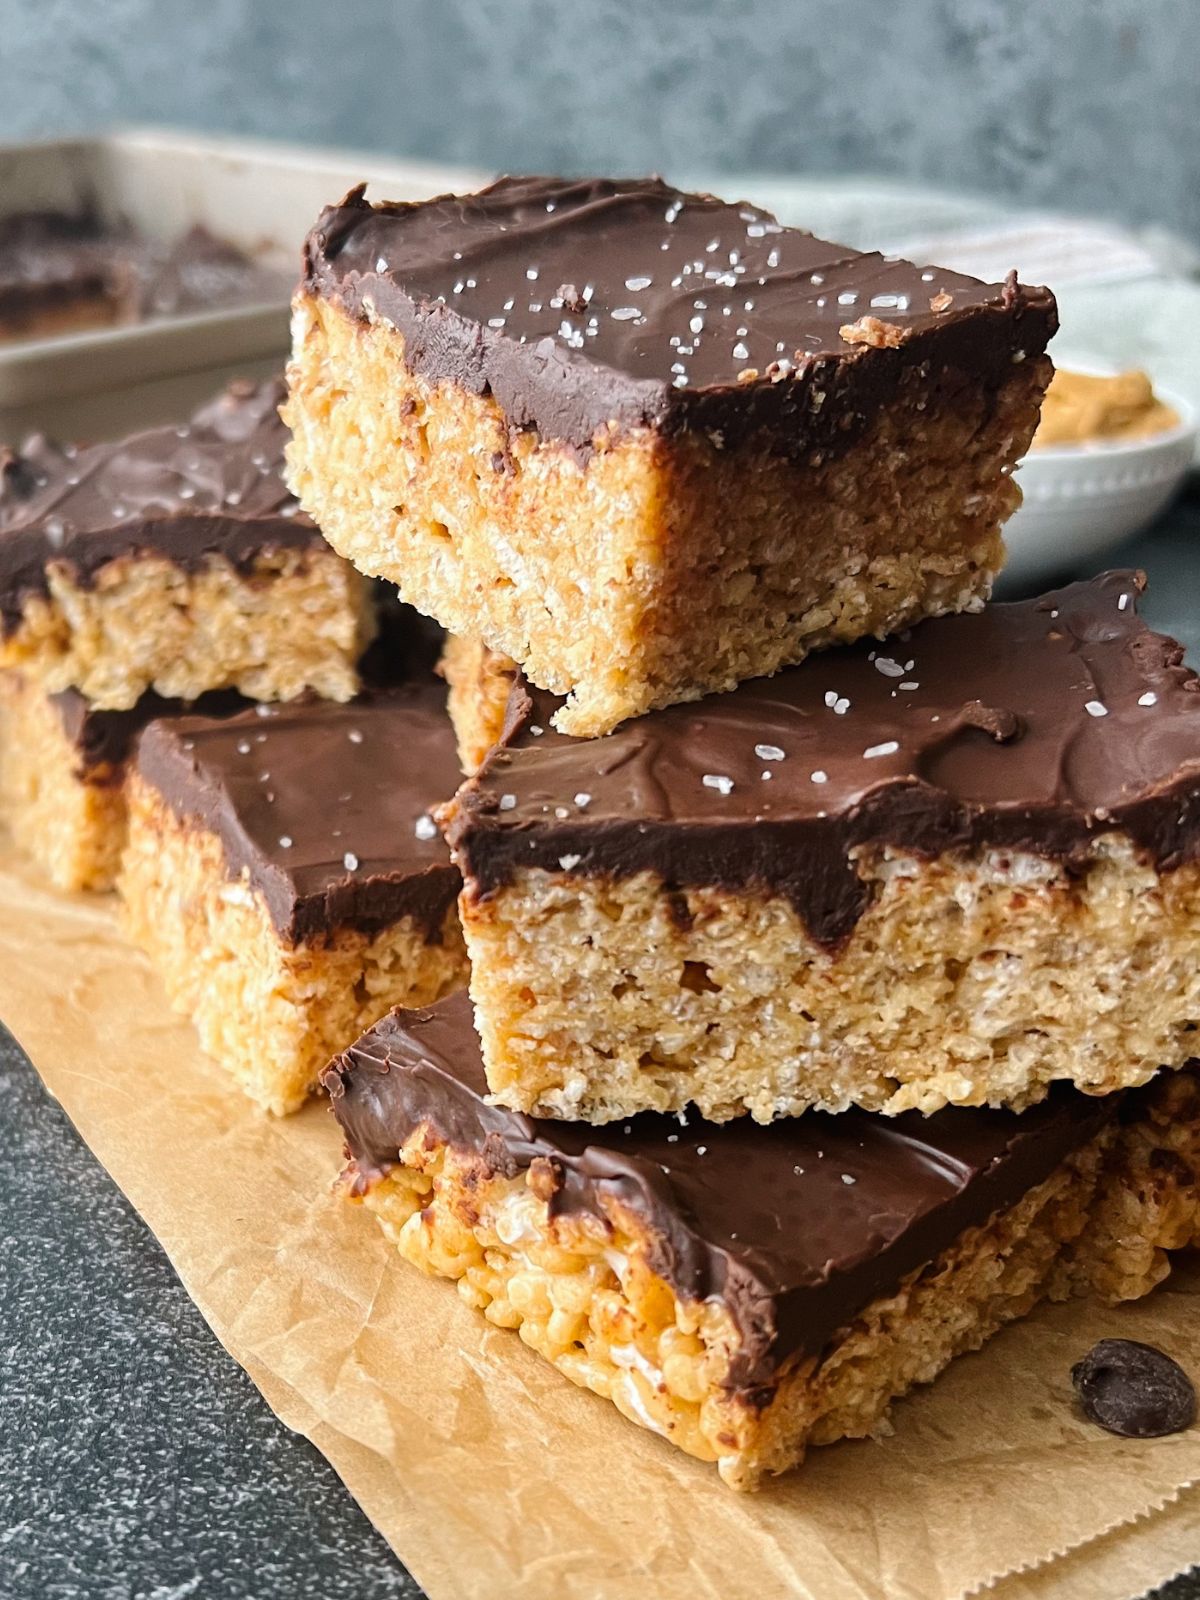 Several chocolate peanut butter krispie treats stacked on each other with a pan of the treats in the background.